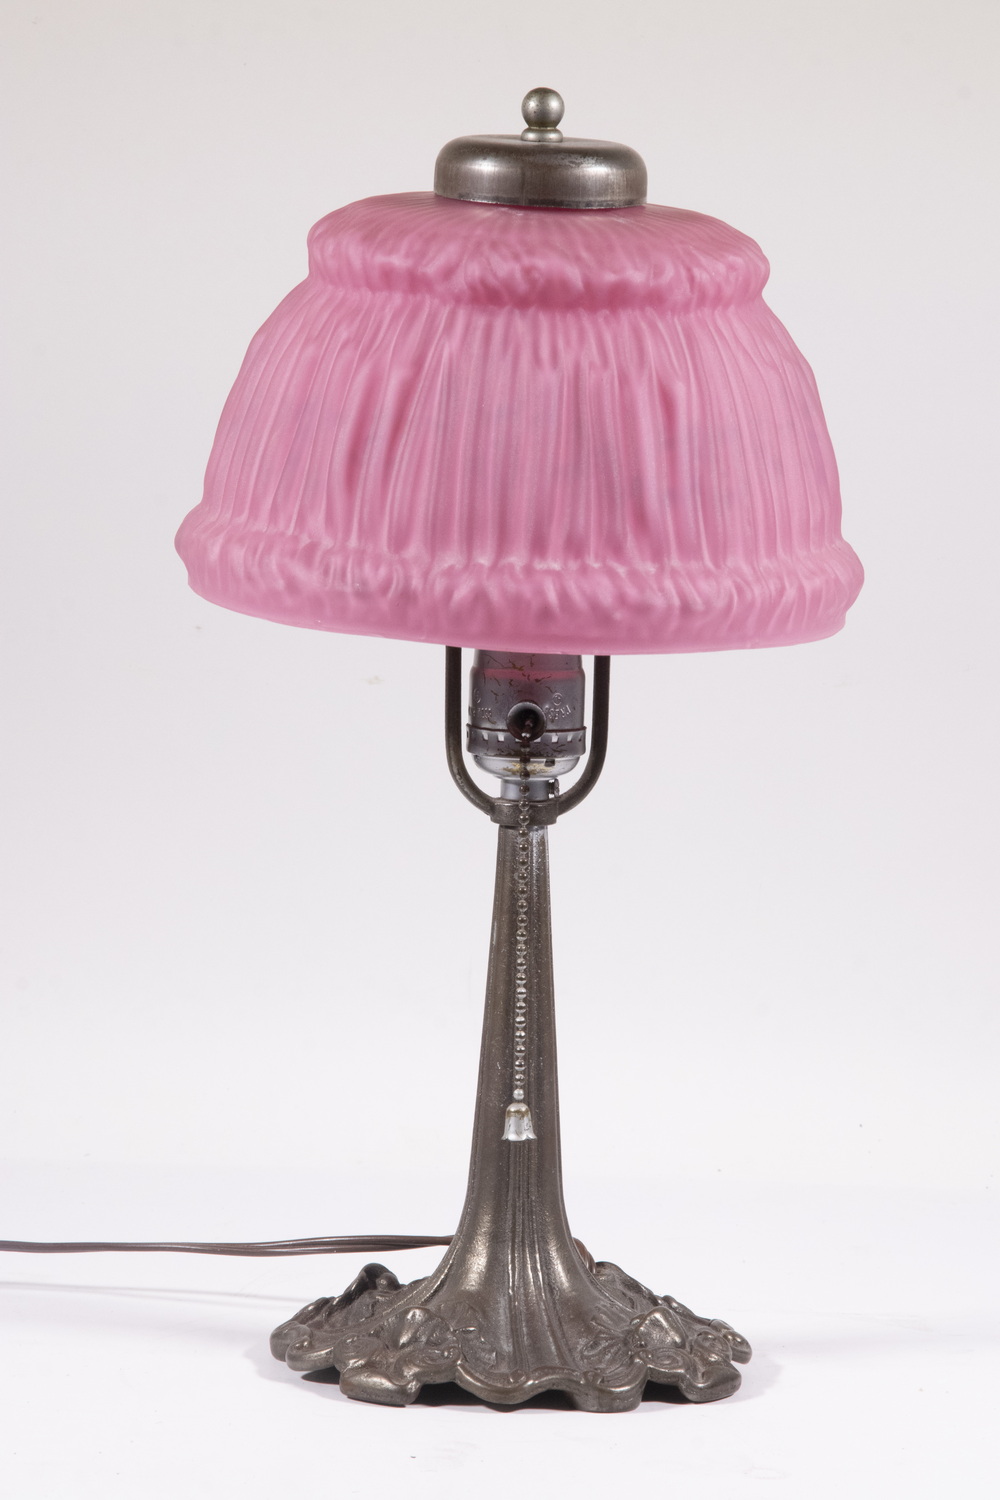 R.B. CO. BOUDOIR LAMP WITH GLASS SHADE